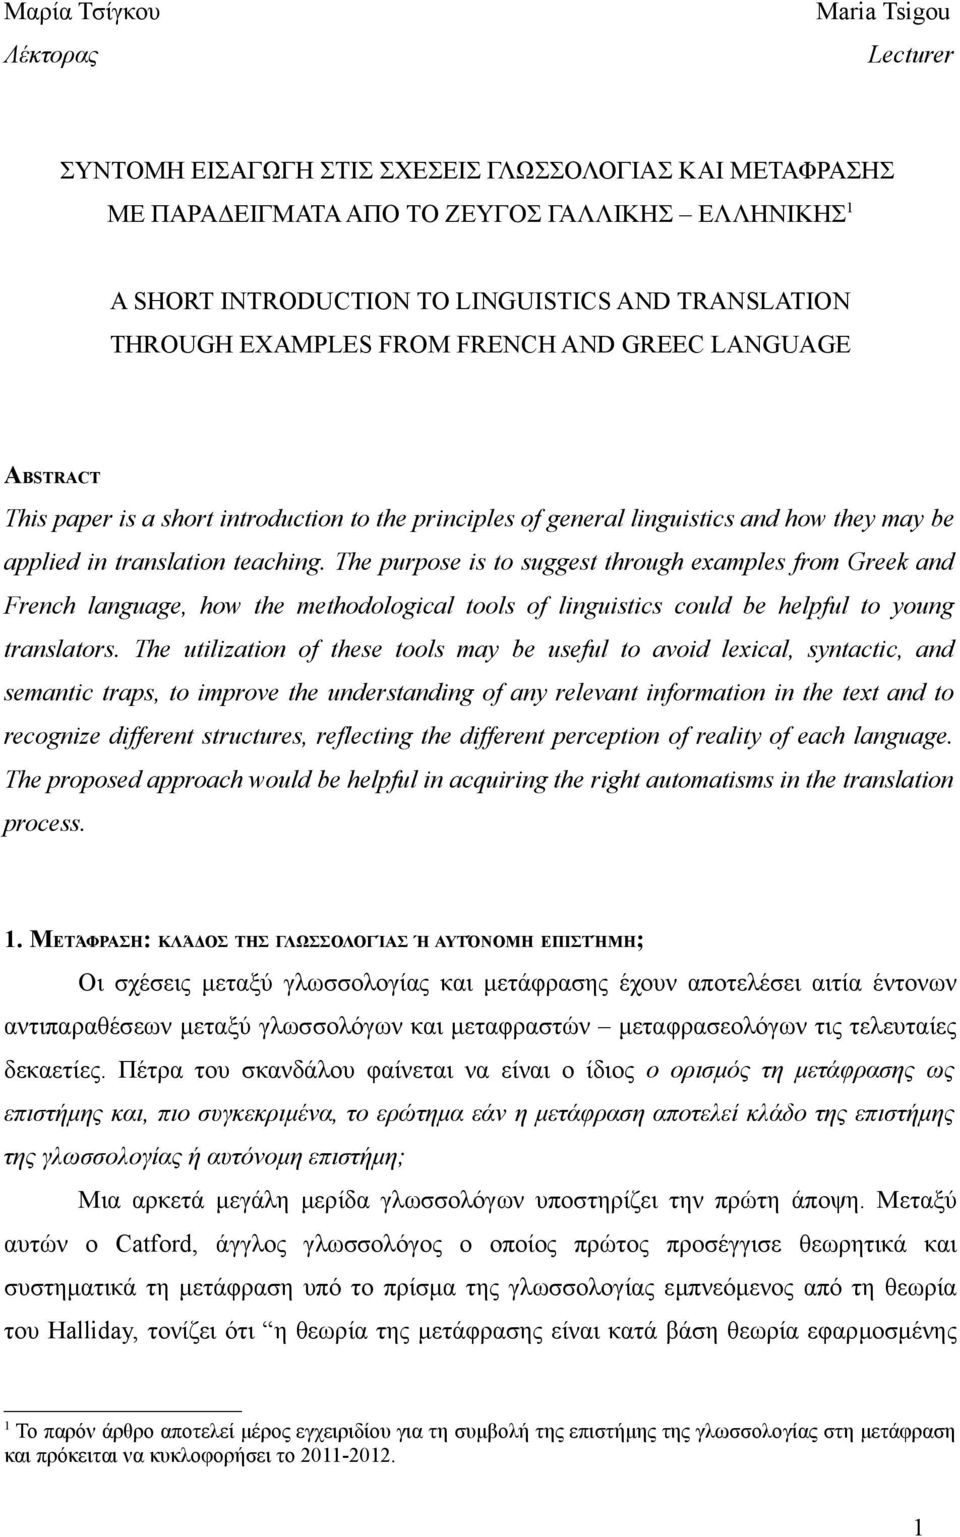 The purpose is to suggest through examples from Greek and French language, how the methodological tools of linguistics could be helpful to young translators.